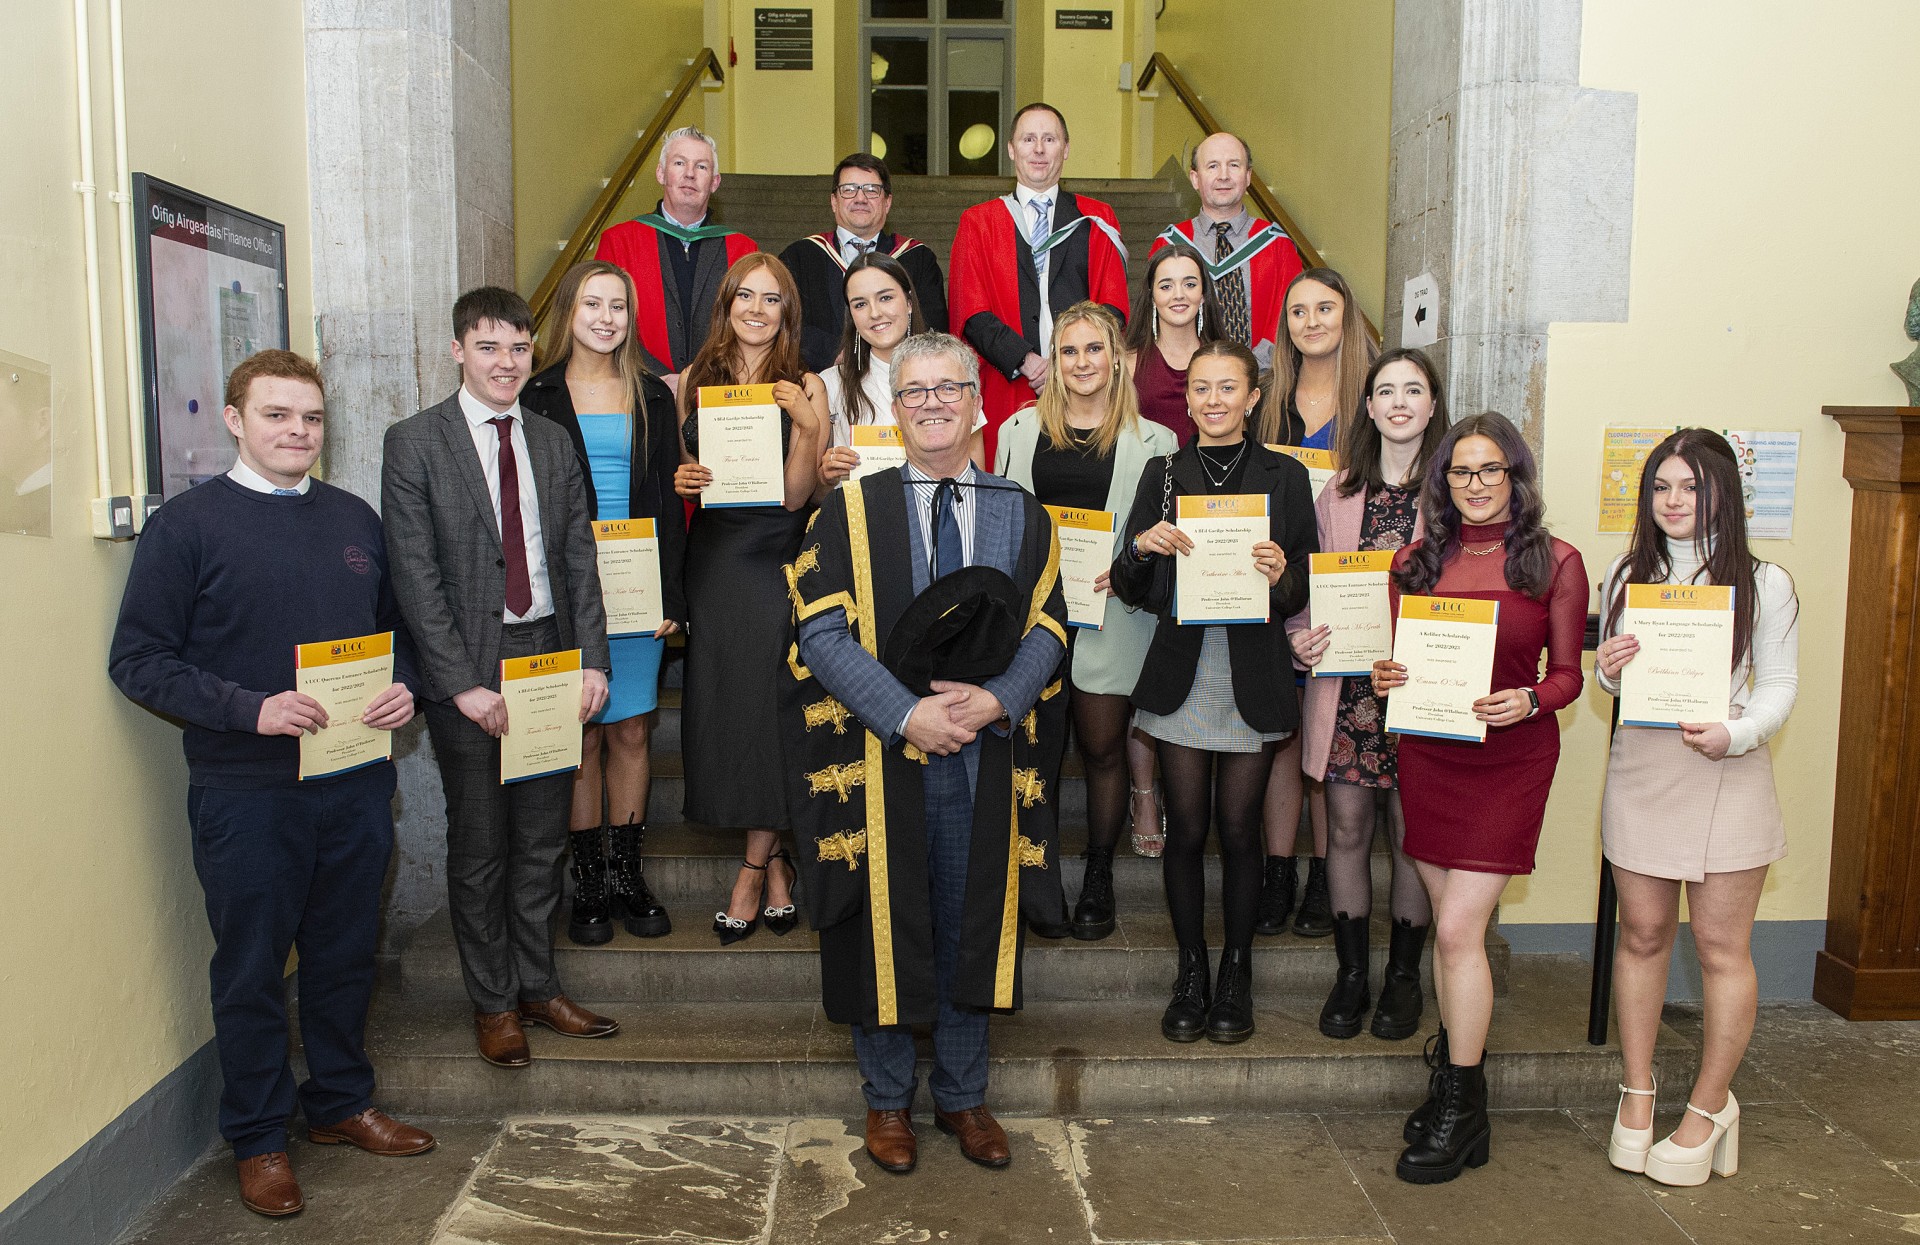 239 Entrance Scholarships awarded to first year students